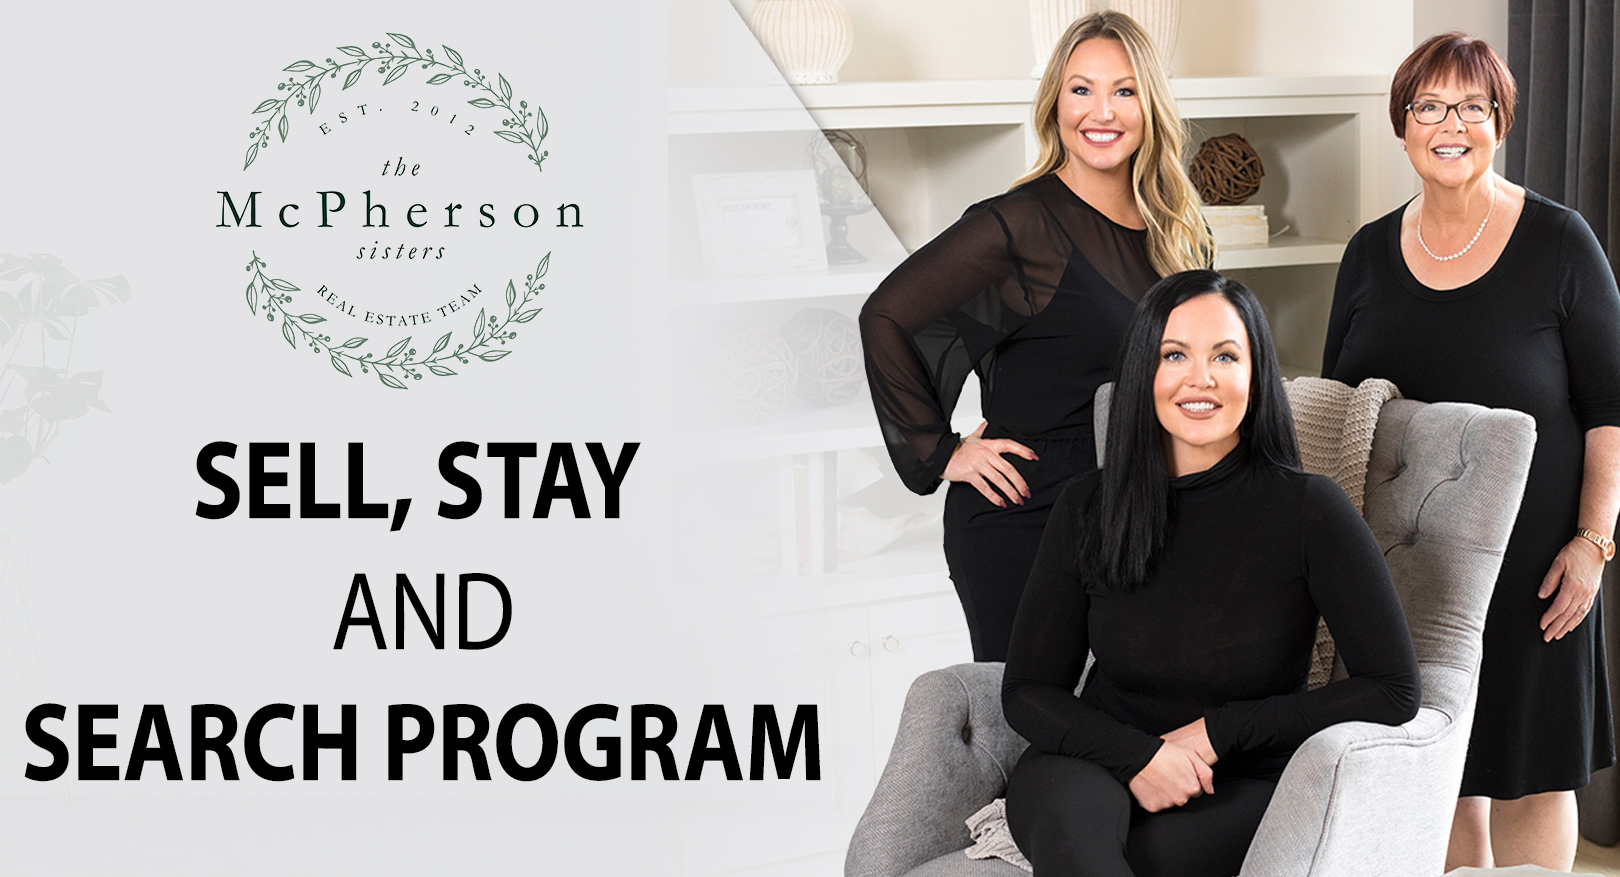 A New Program We're Offering Our Clients